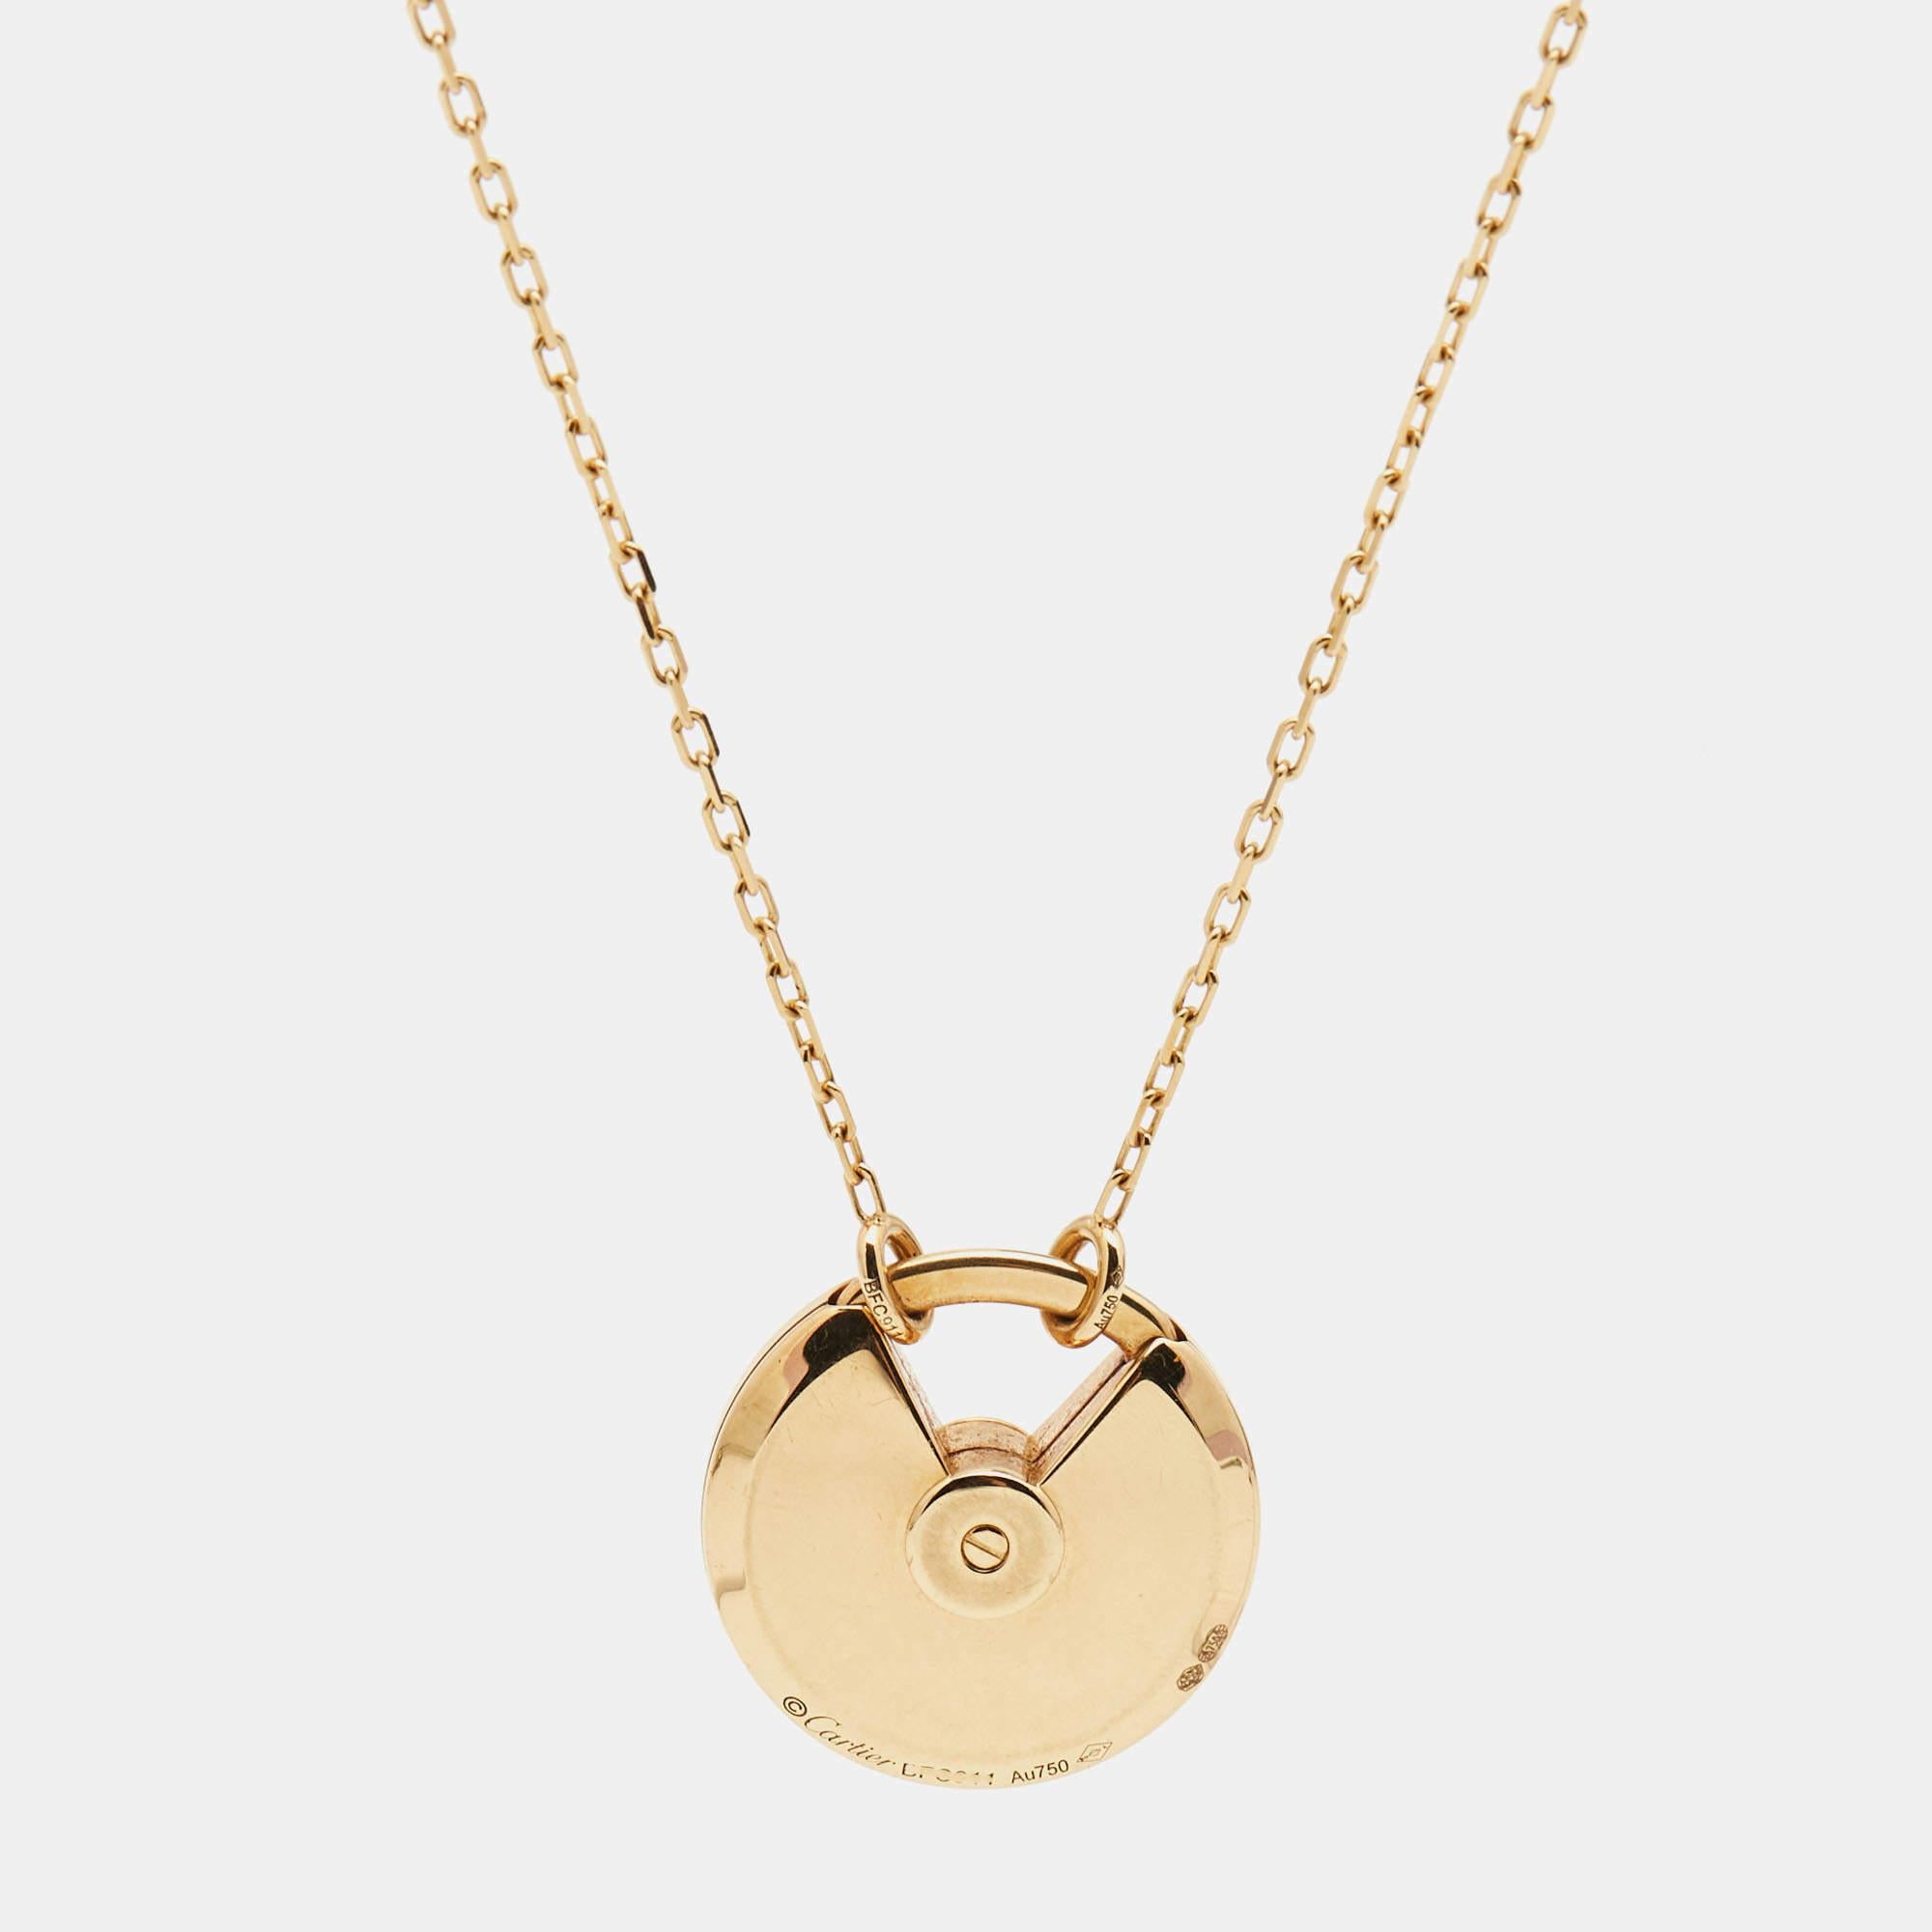 A minimal yet magnificent offering from Cartier's Amulette de Cartier line. The necklace comes sculpted in 18k yellow gold and it has the signature motif in lapis lazuli highlighted by a shimmering diamond. Smoothly finished, the desirable creation